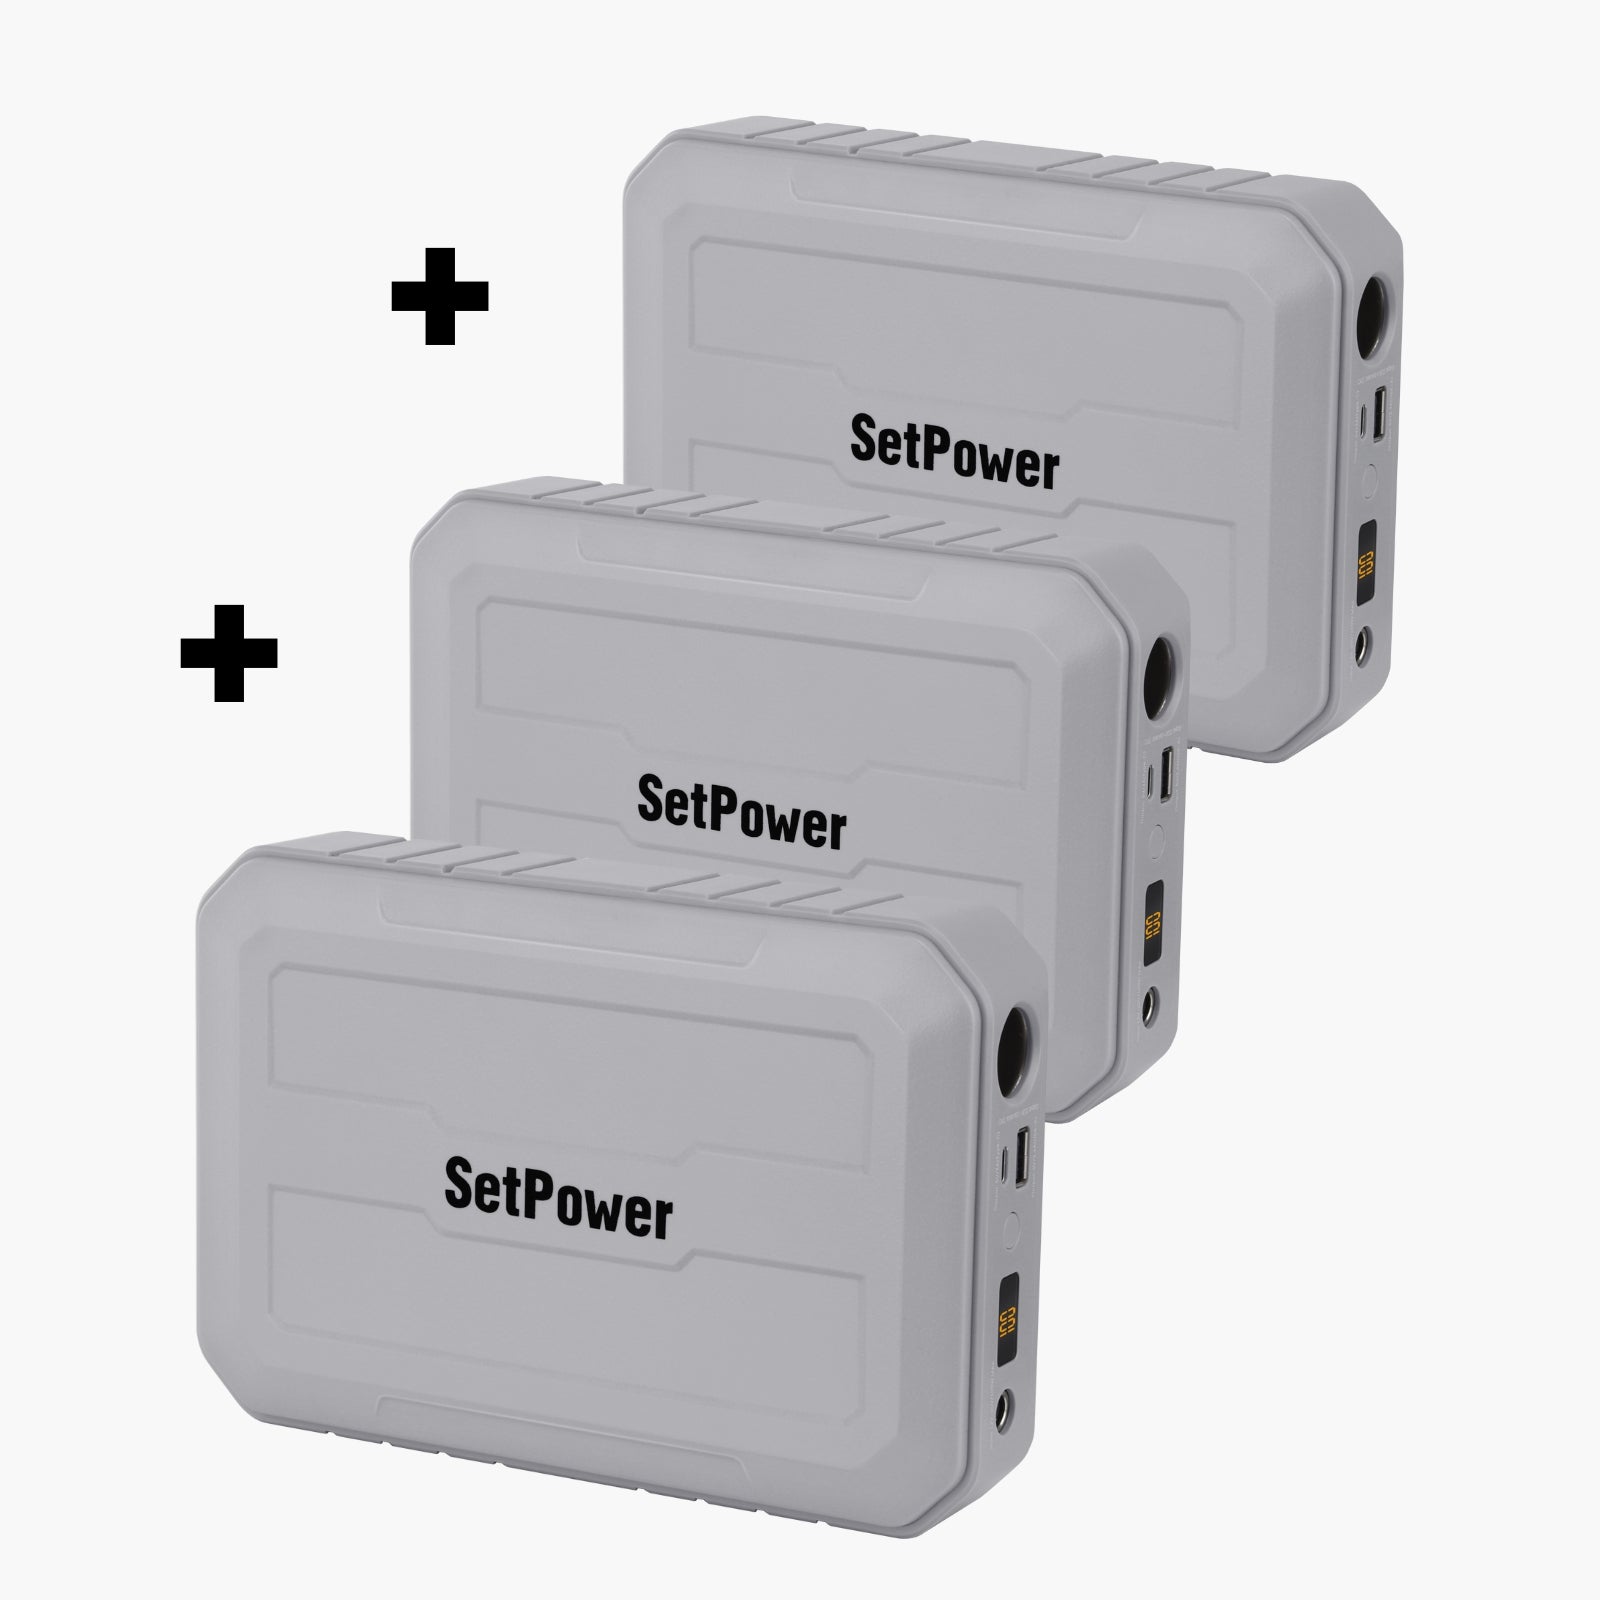 Early Bird | Setpower PG216Wh Portable Power Station Power Bank - $159 Only